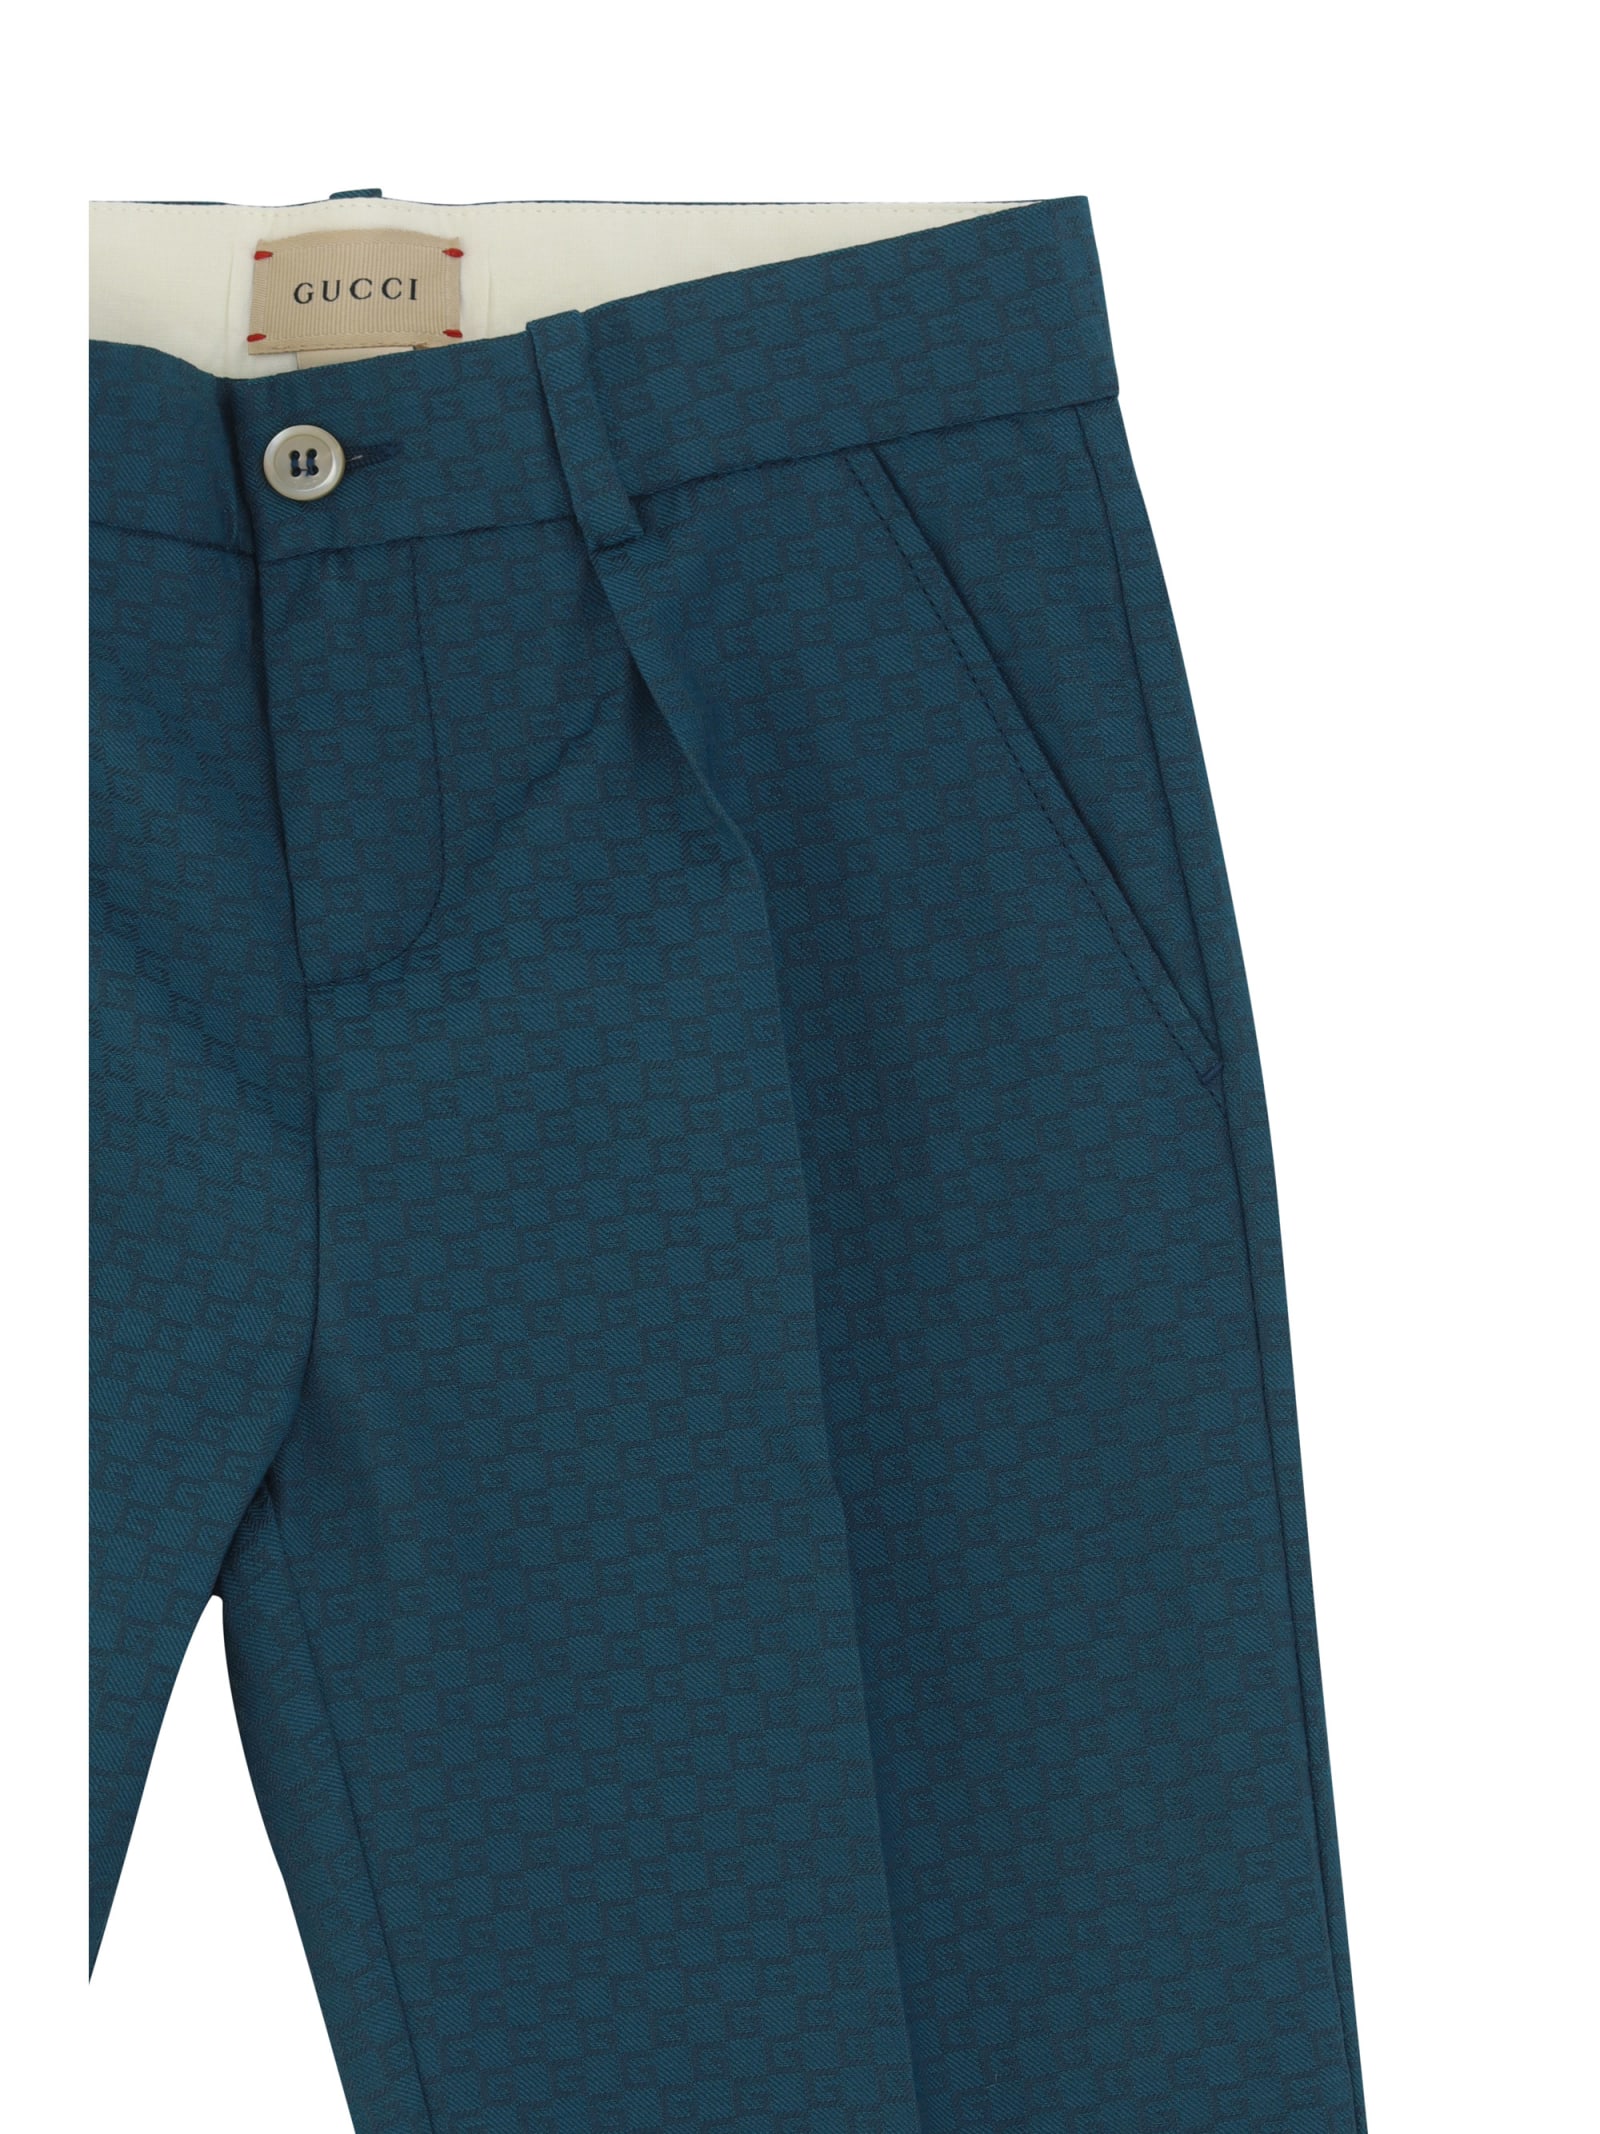 Shop Gucci Pants For Boy In Dark Teal